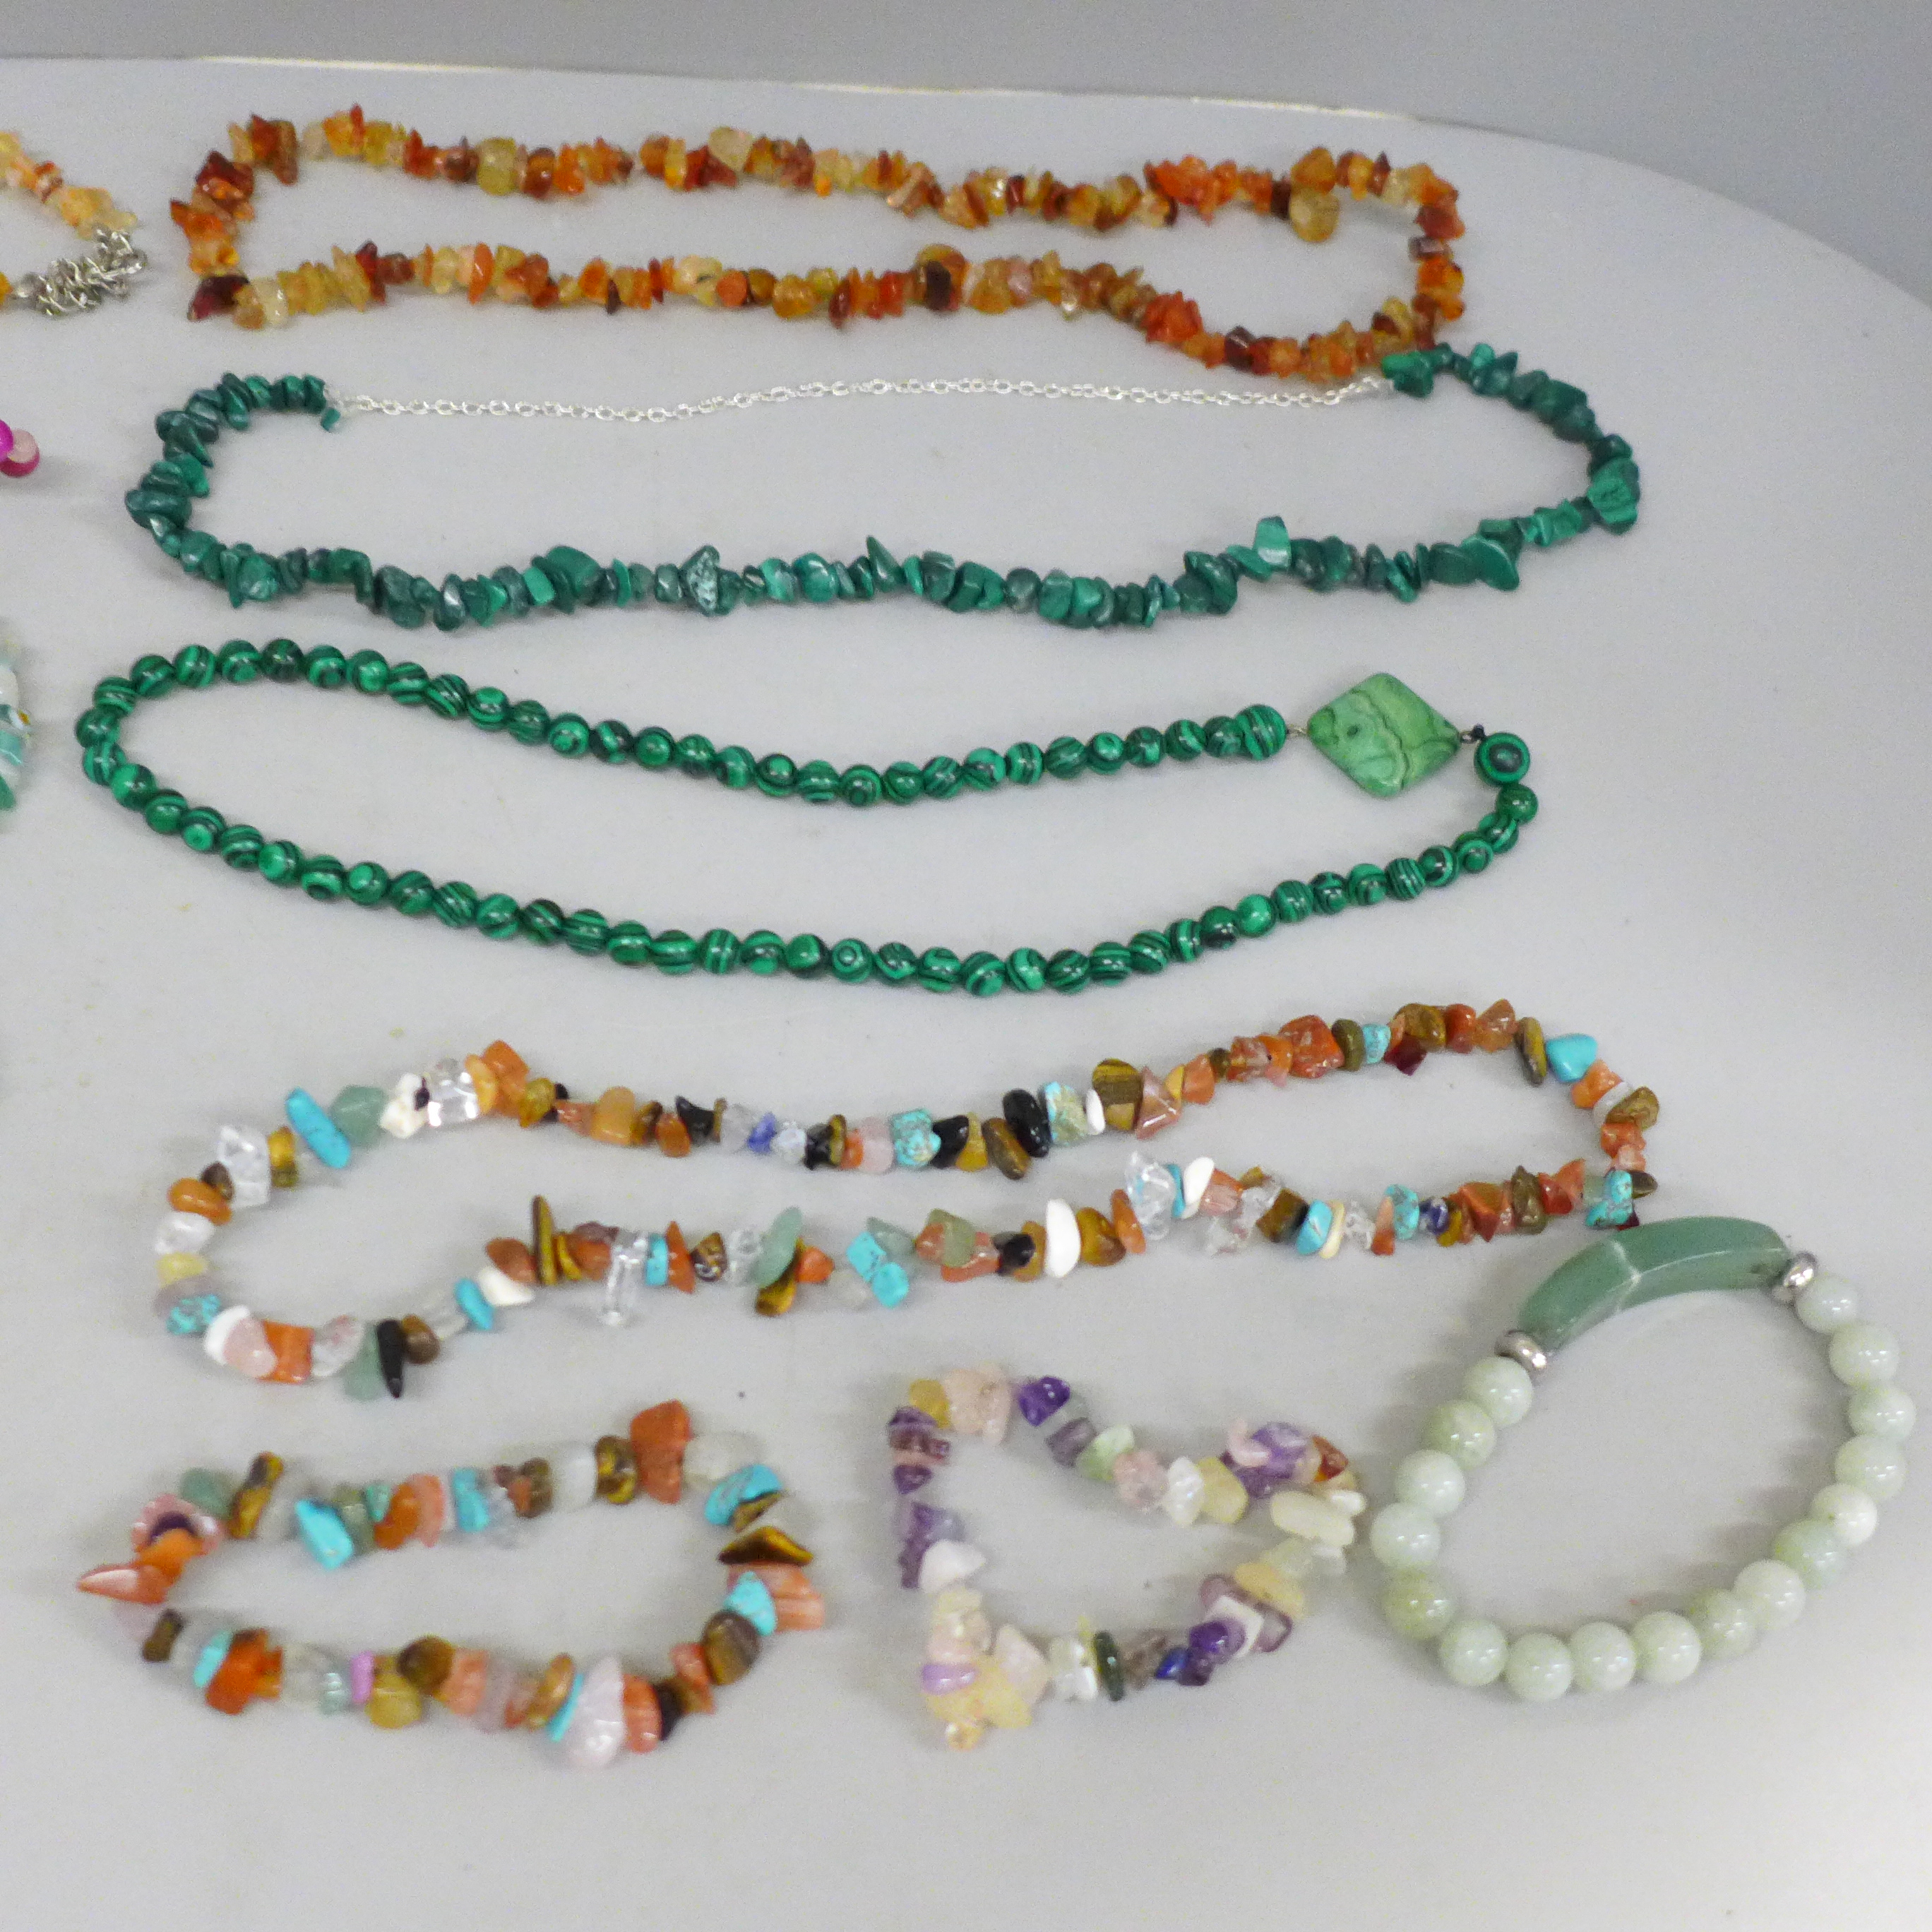 Malachite and semi precious stone necklaces and a large agate pendant and chain - Image 3 of 3